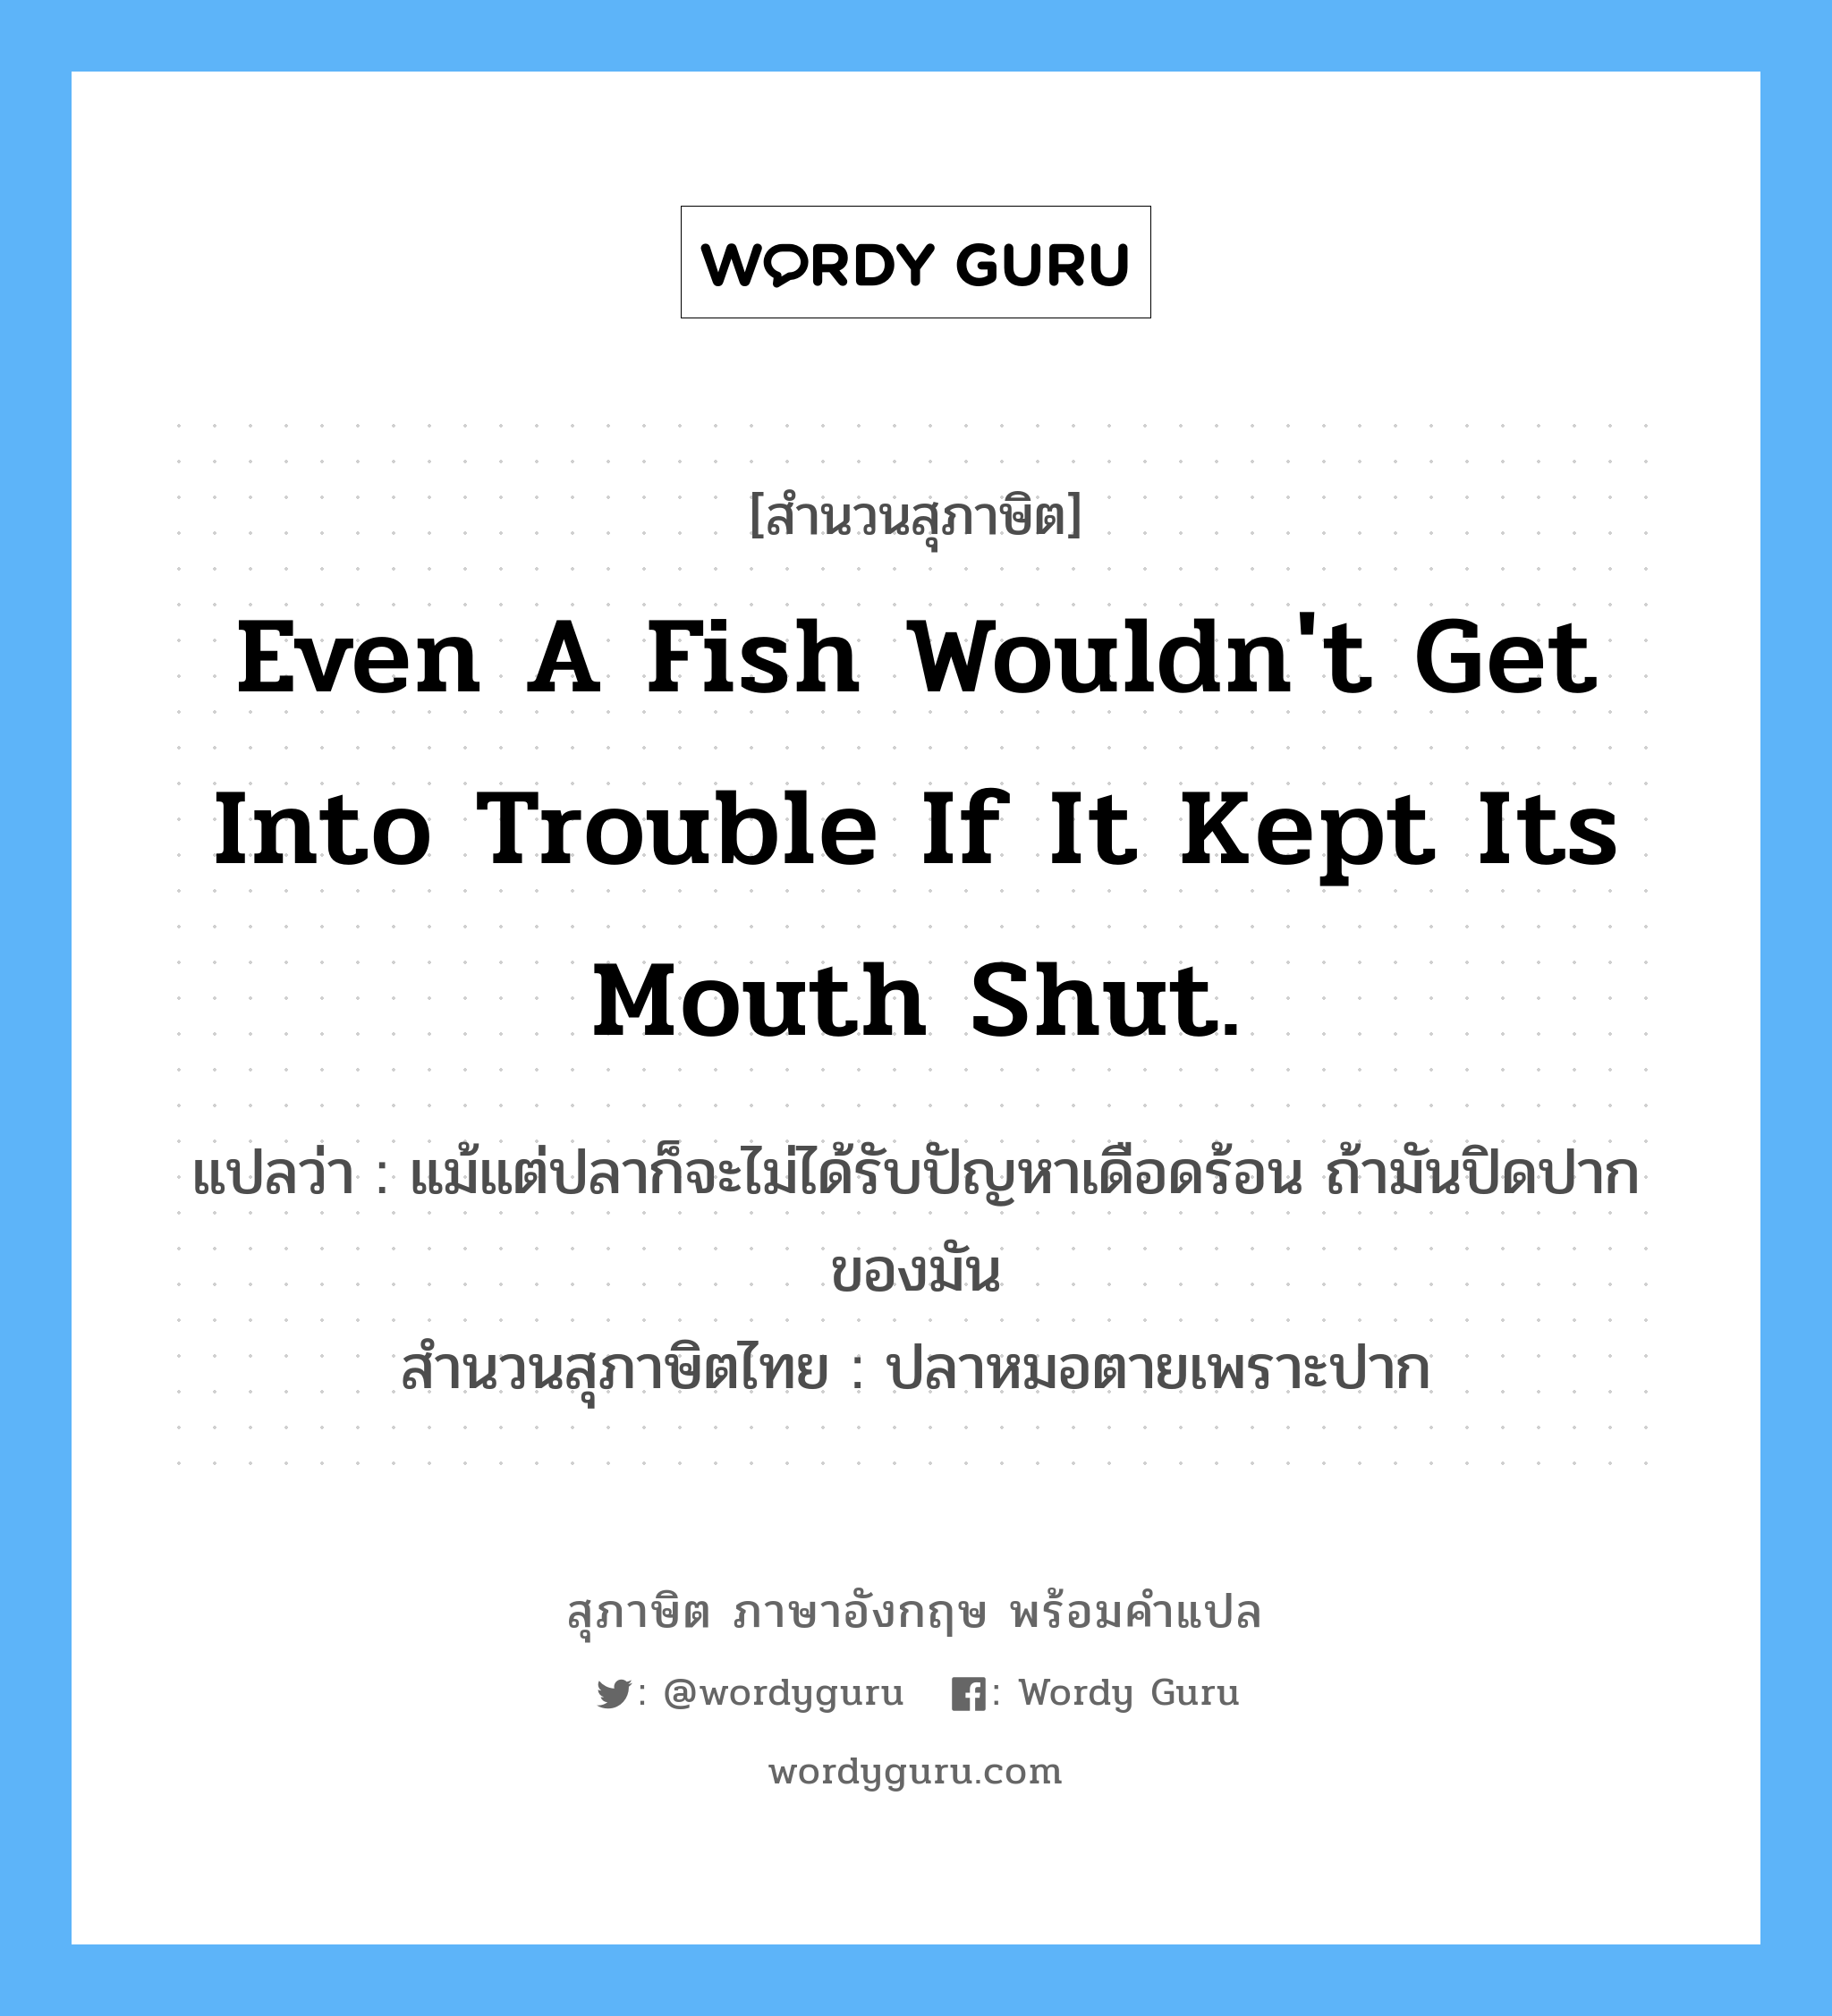 Even a fish wouldn't get into trouble if it kept its mouth shut.